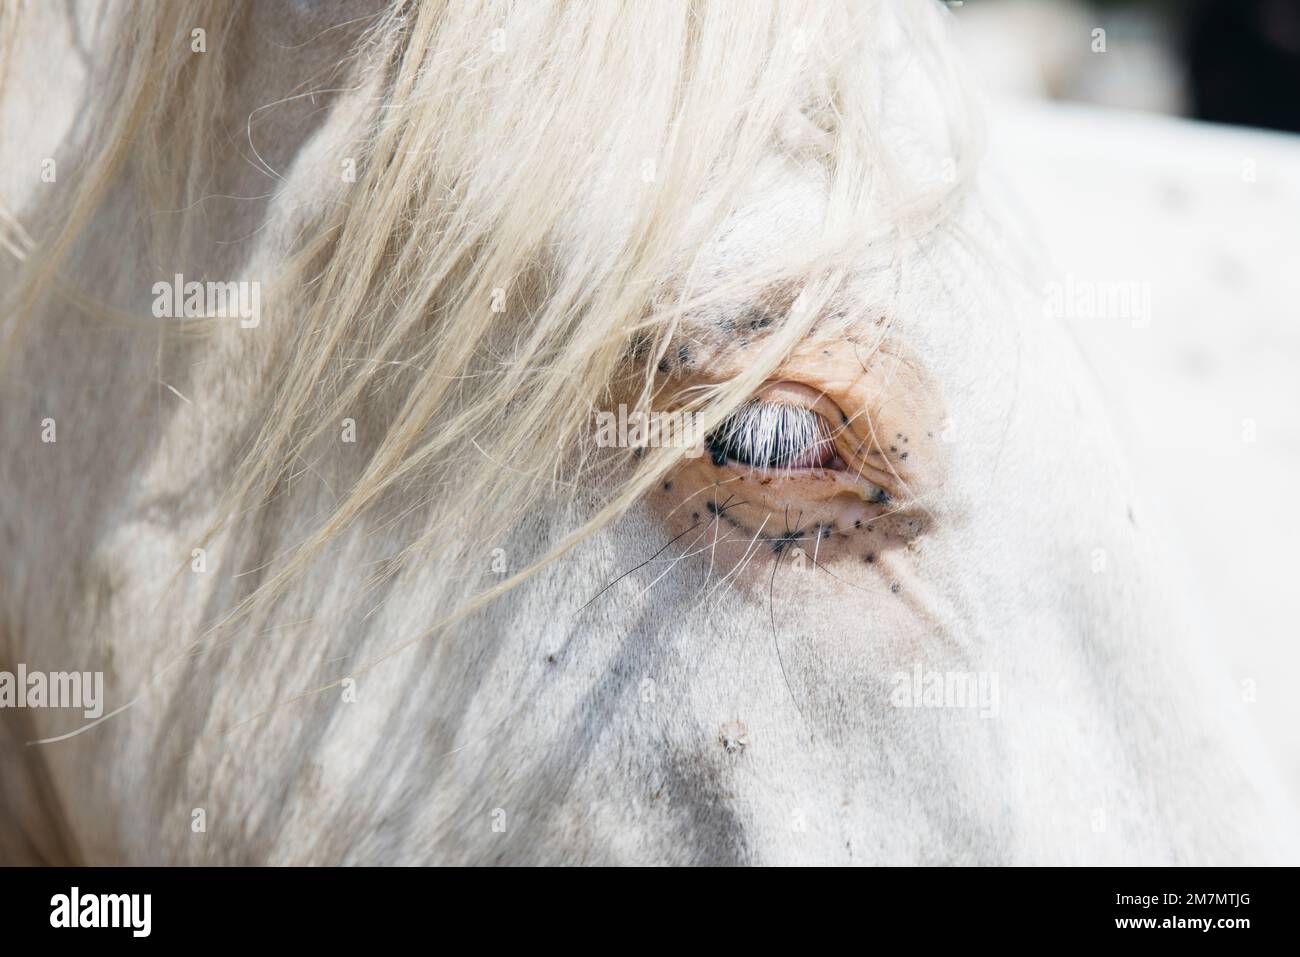 Eye of a white horse in the midday sun Stock Photo